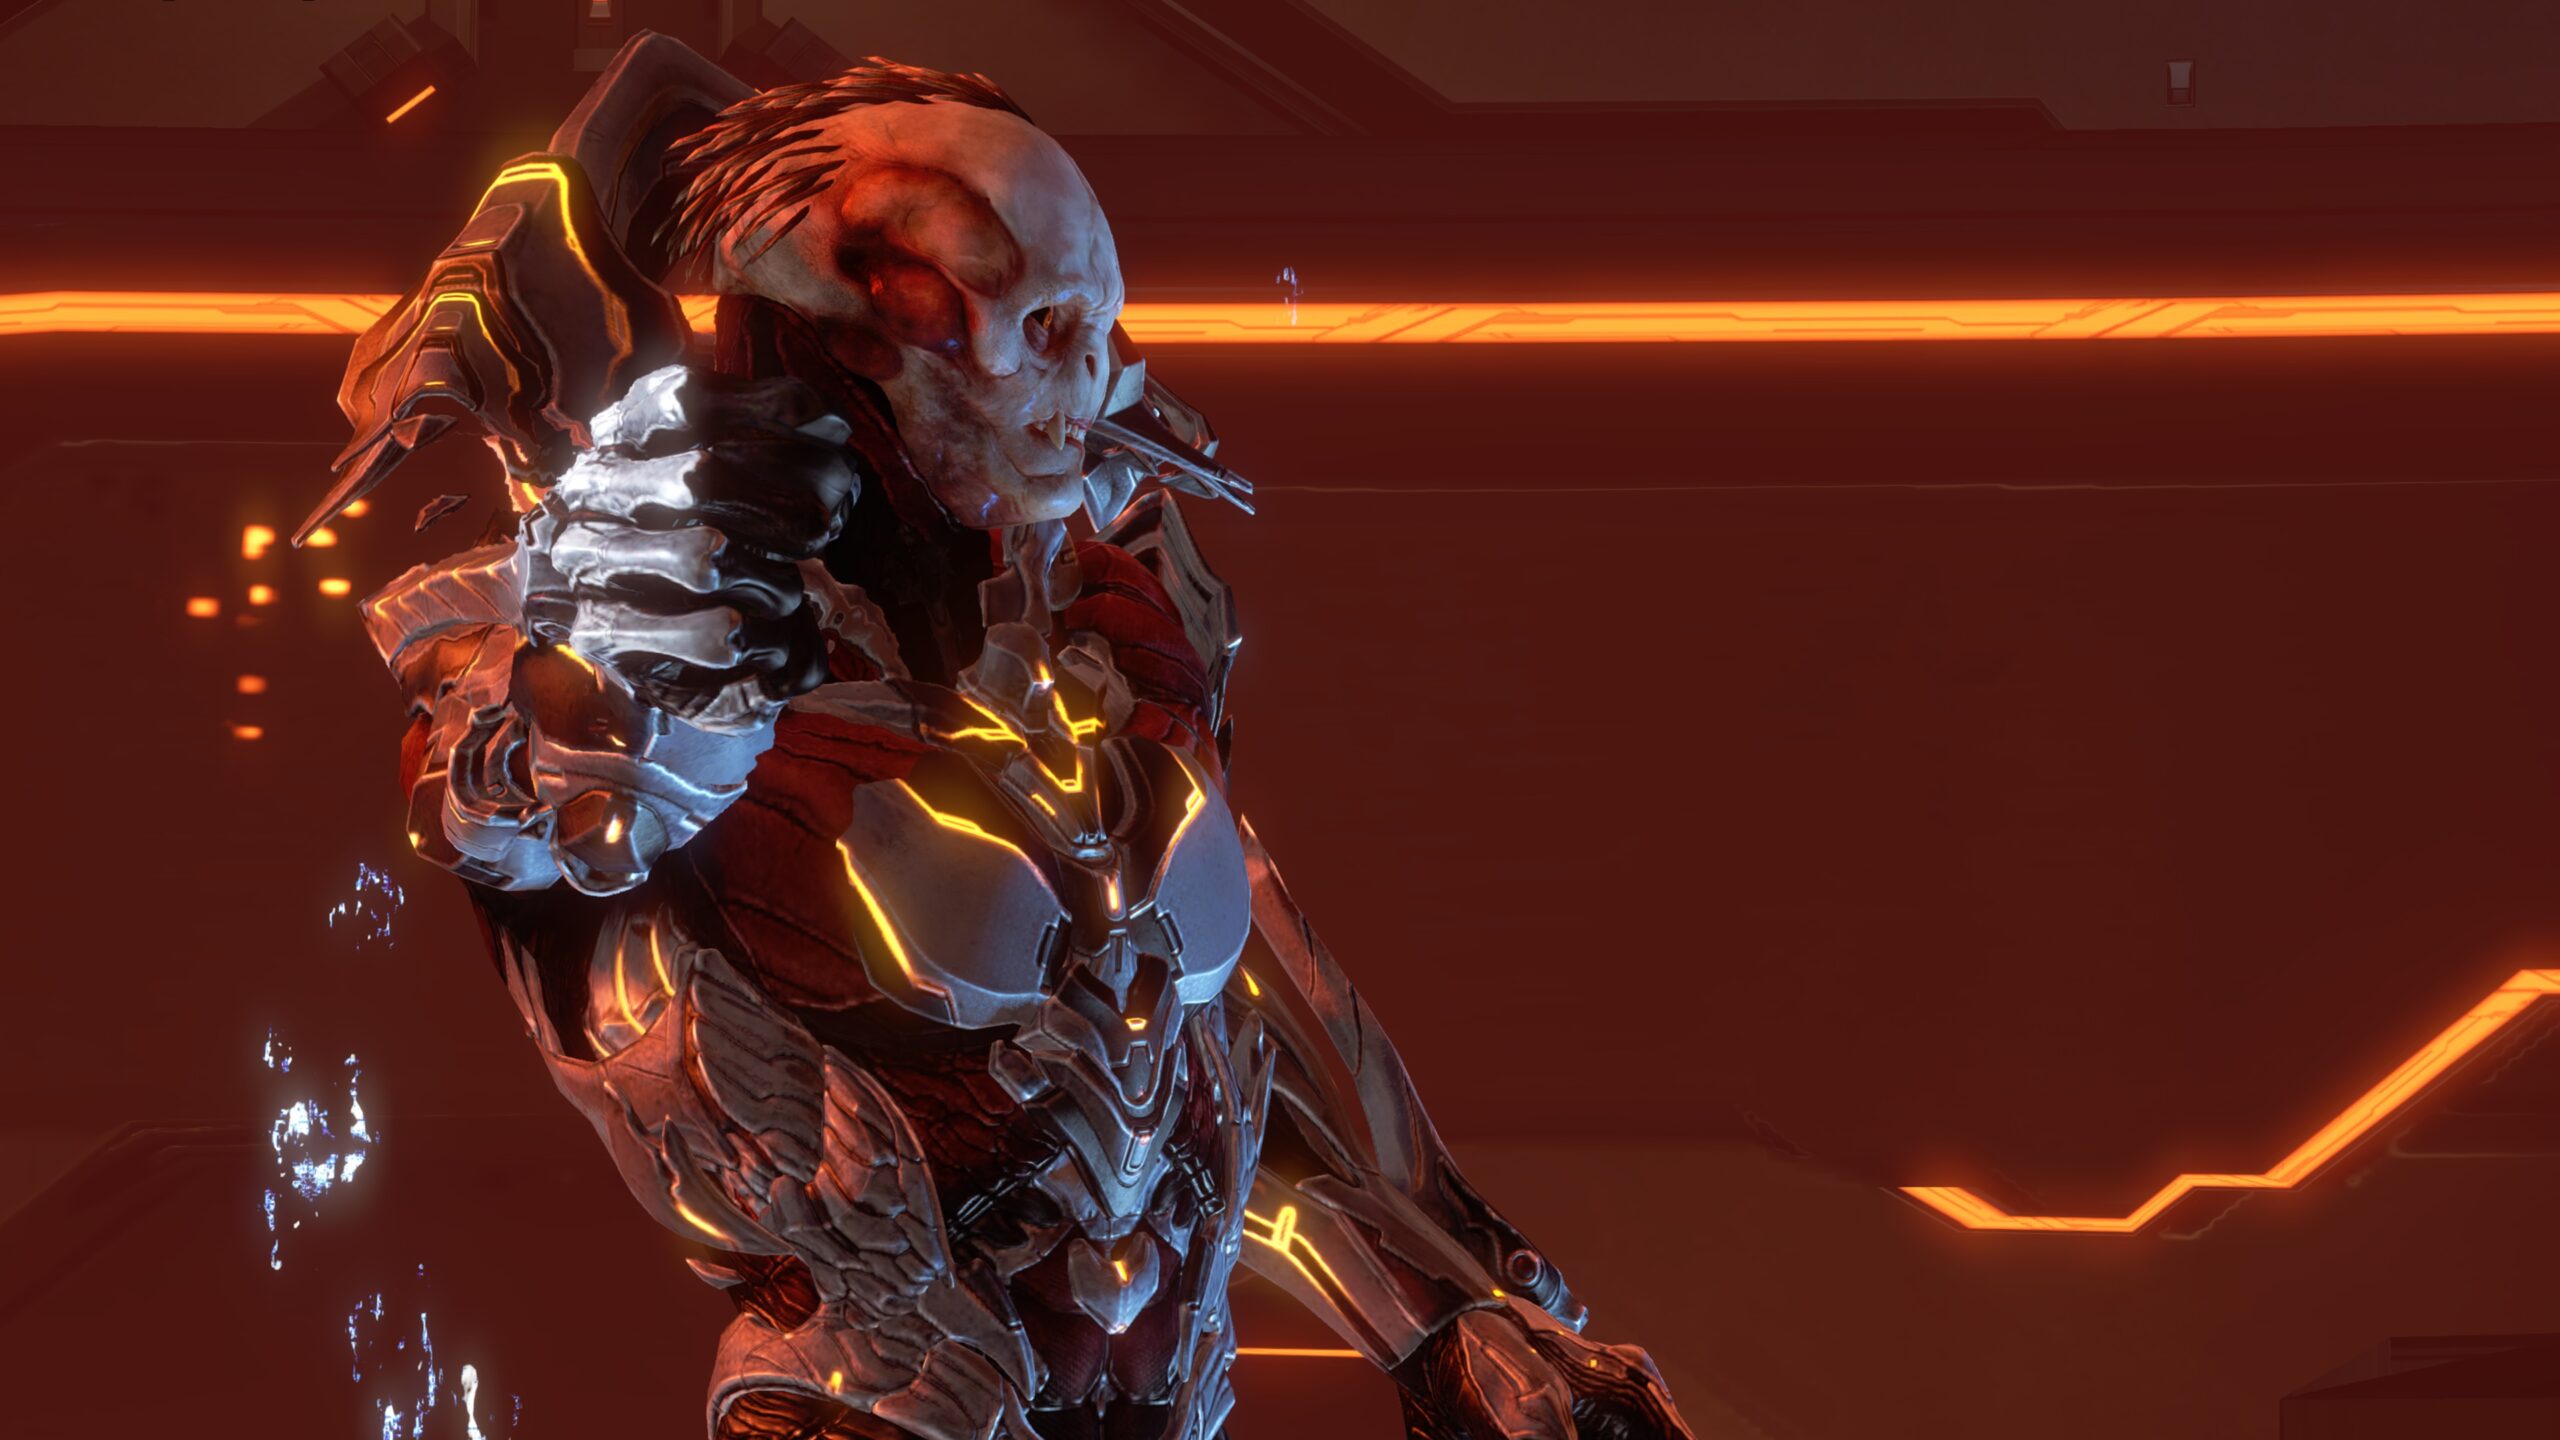 Halo 4 screenshot of the unhelmeted Didact